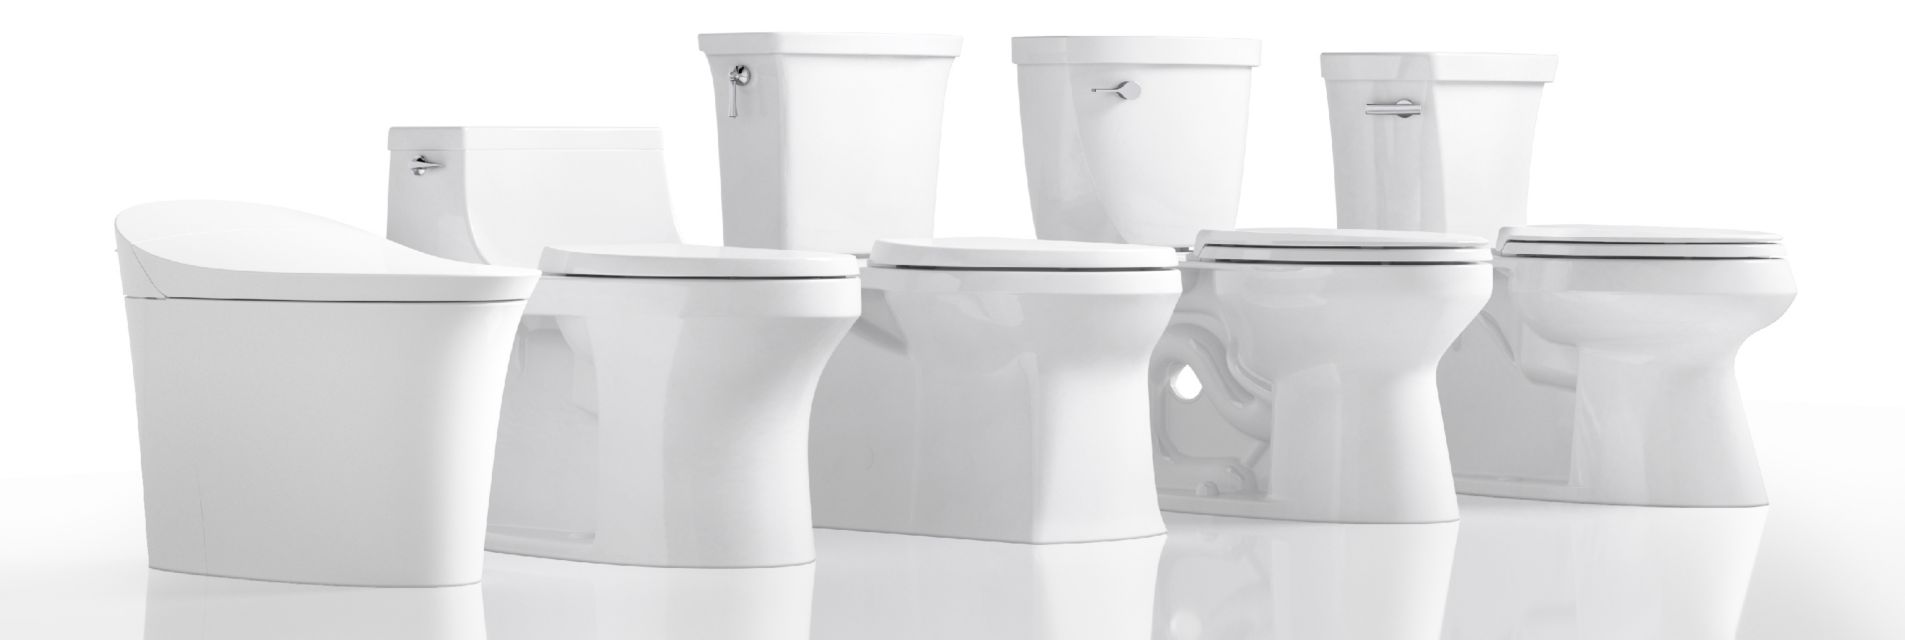 Toilets Buying Guide